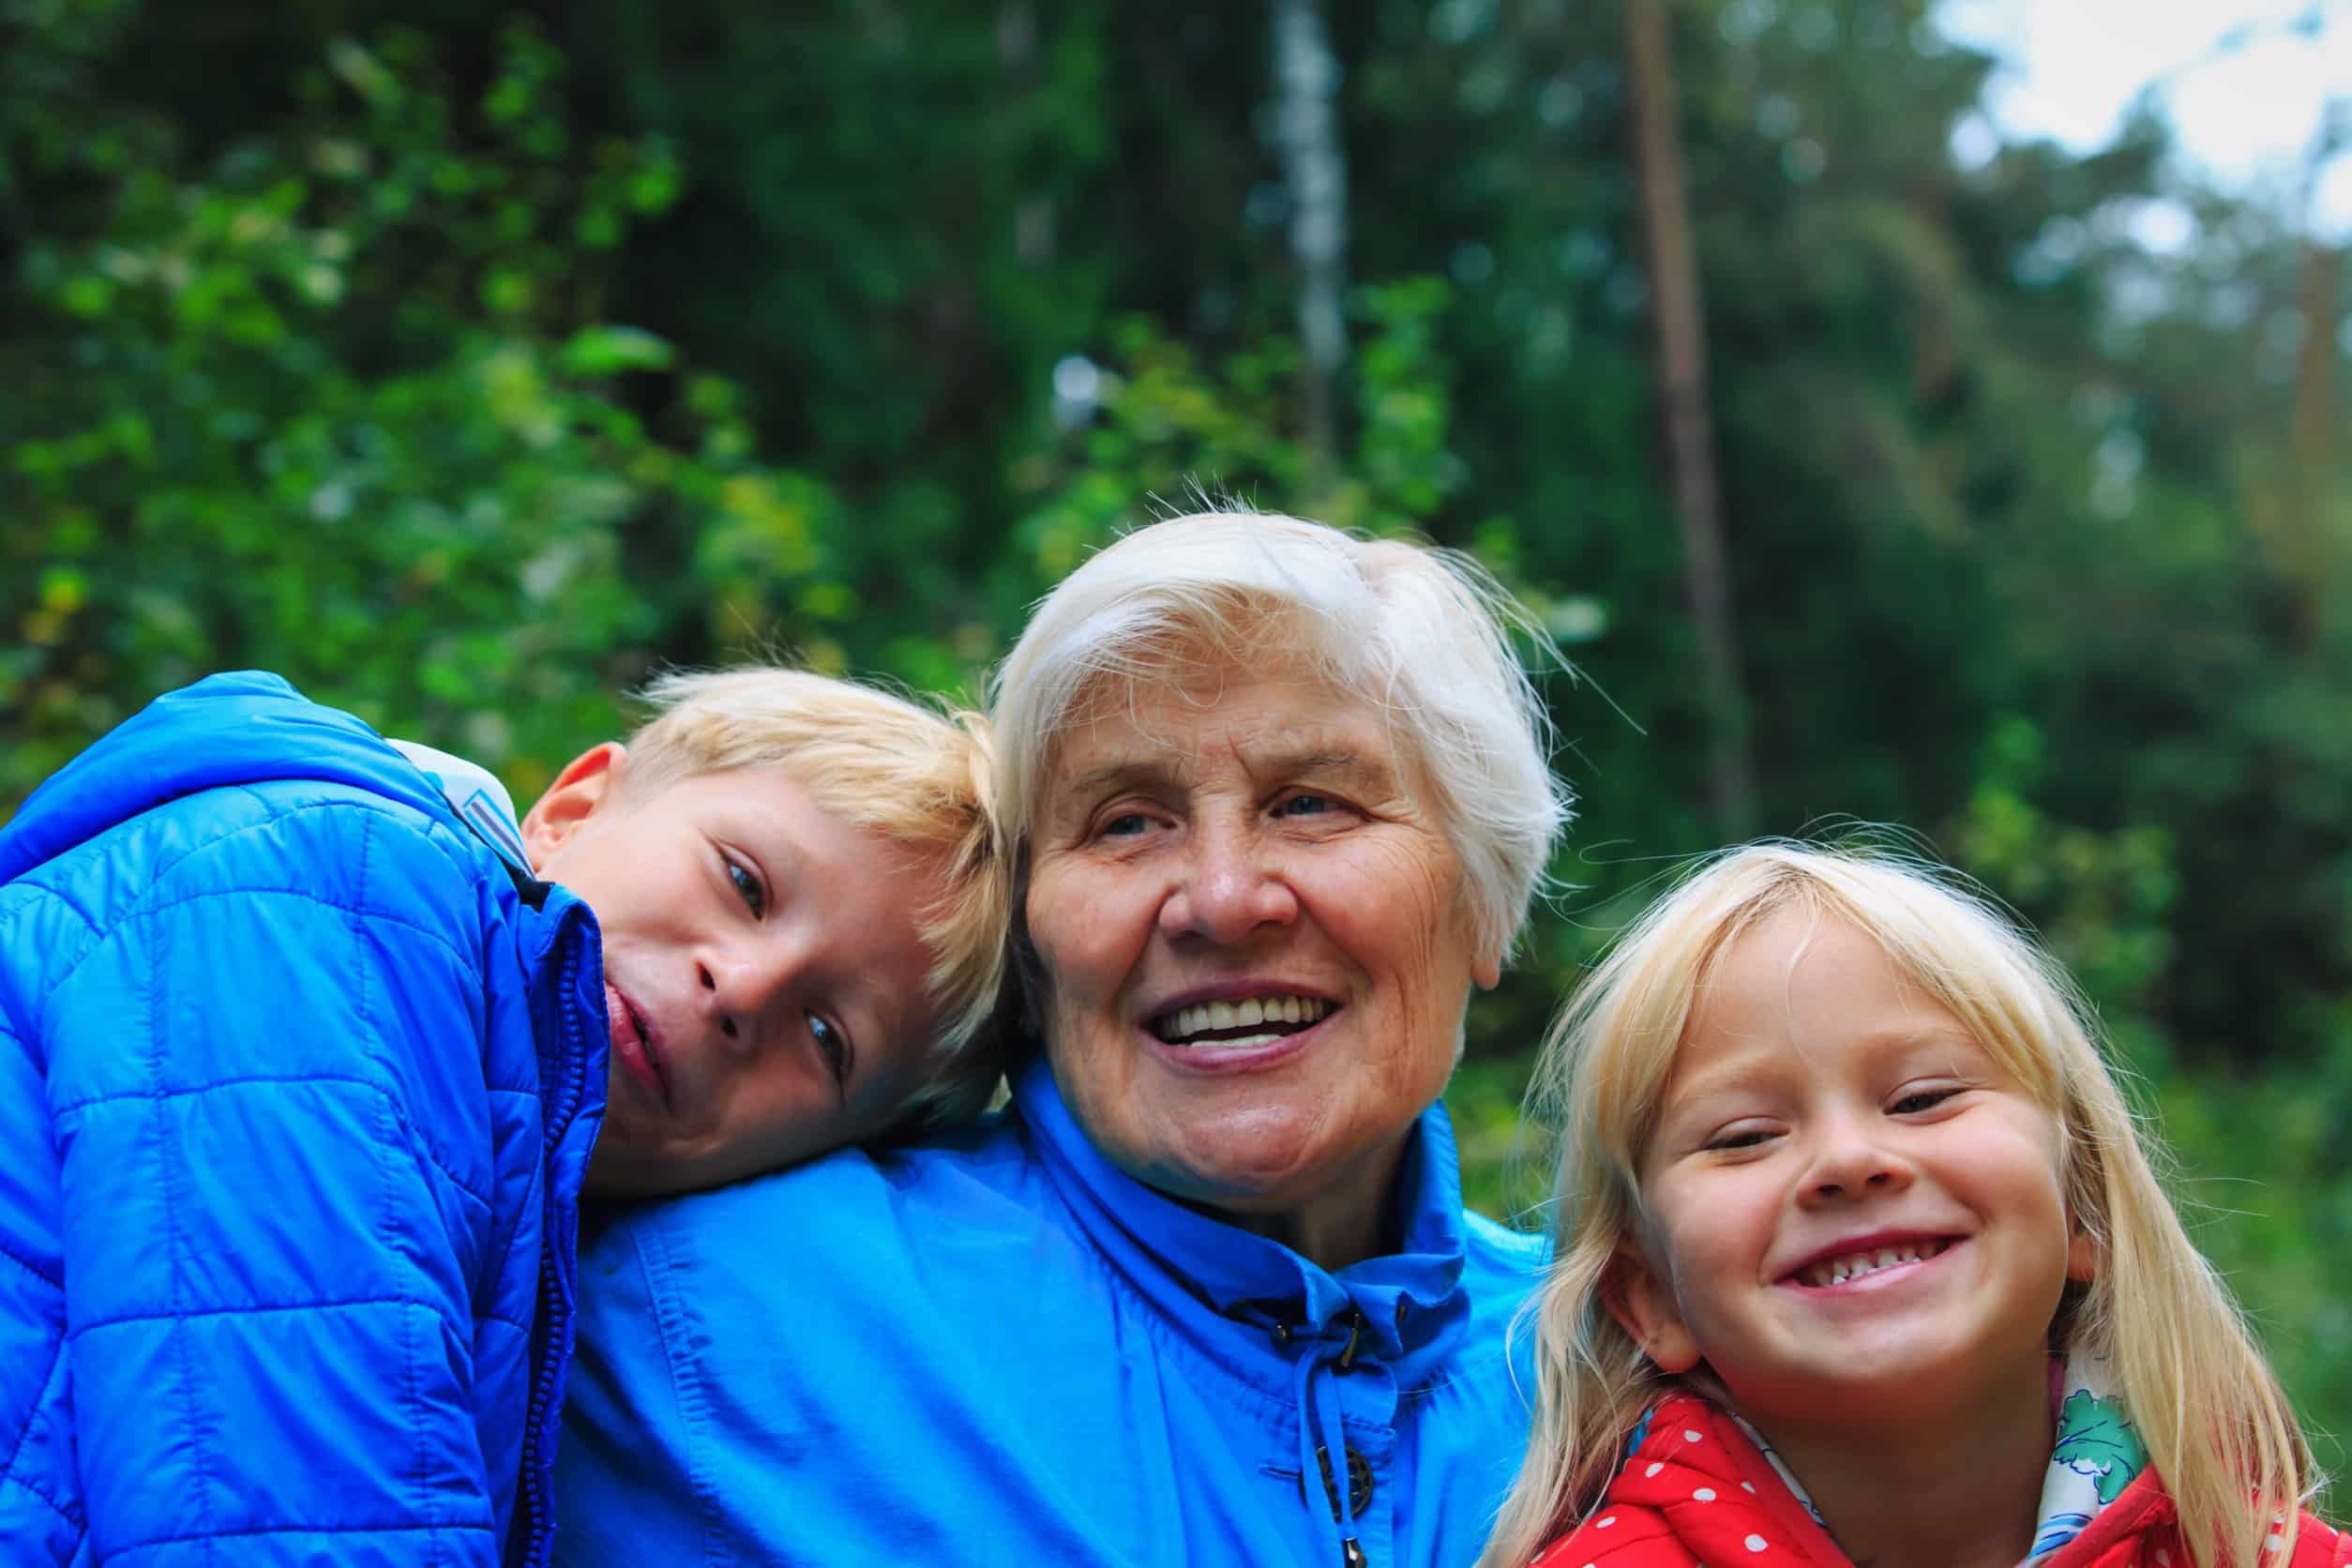 A smiling elderly woman with two young children outdoors, embodying the spirit of grandparent sponsorship in Canada.